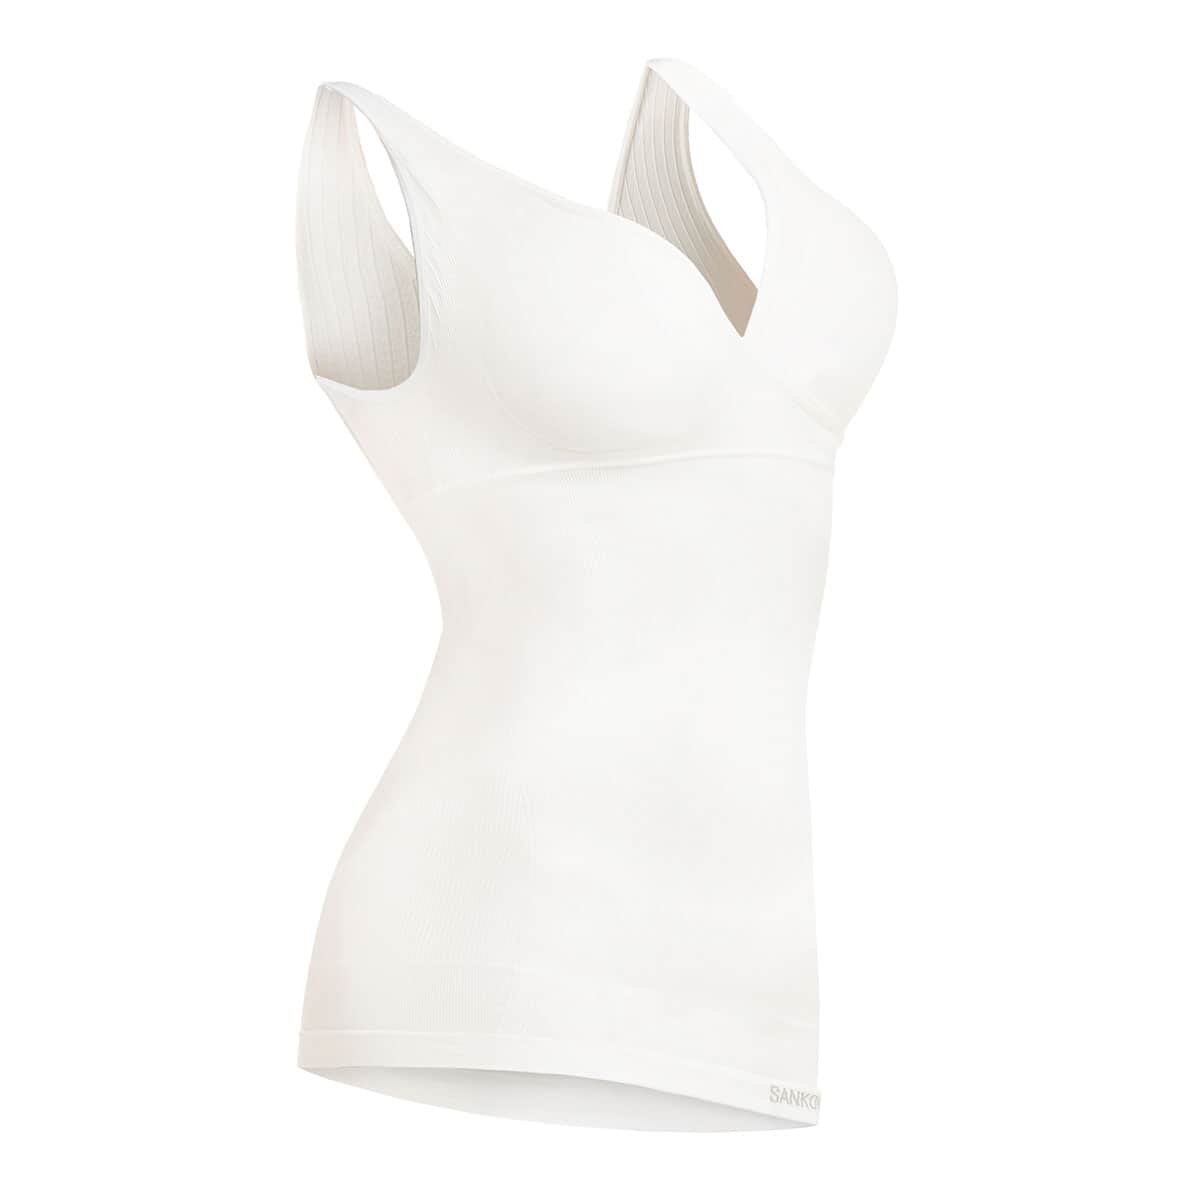 Buy SANKOM Patent Set of 2 Classic Body Shaping Padded Camisole with Built-in  Bra (XL/XXL, Black & Beige) at ShopLC.